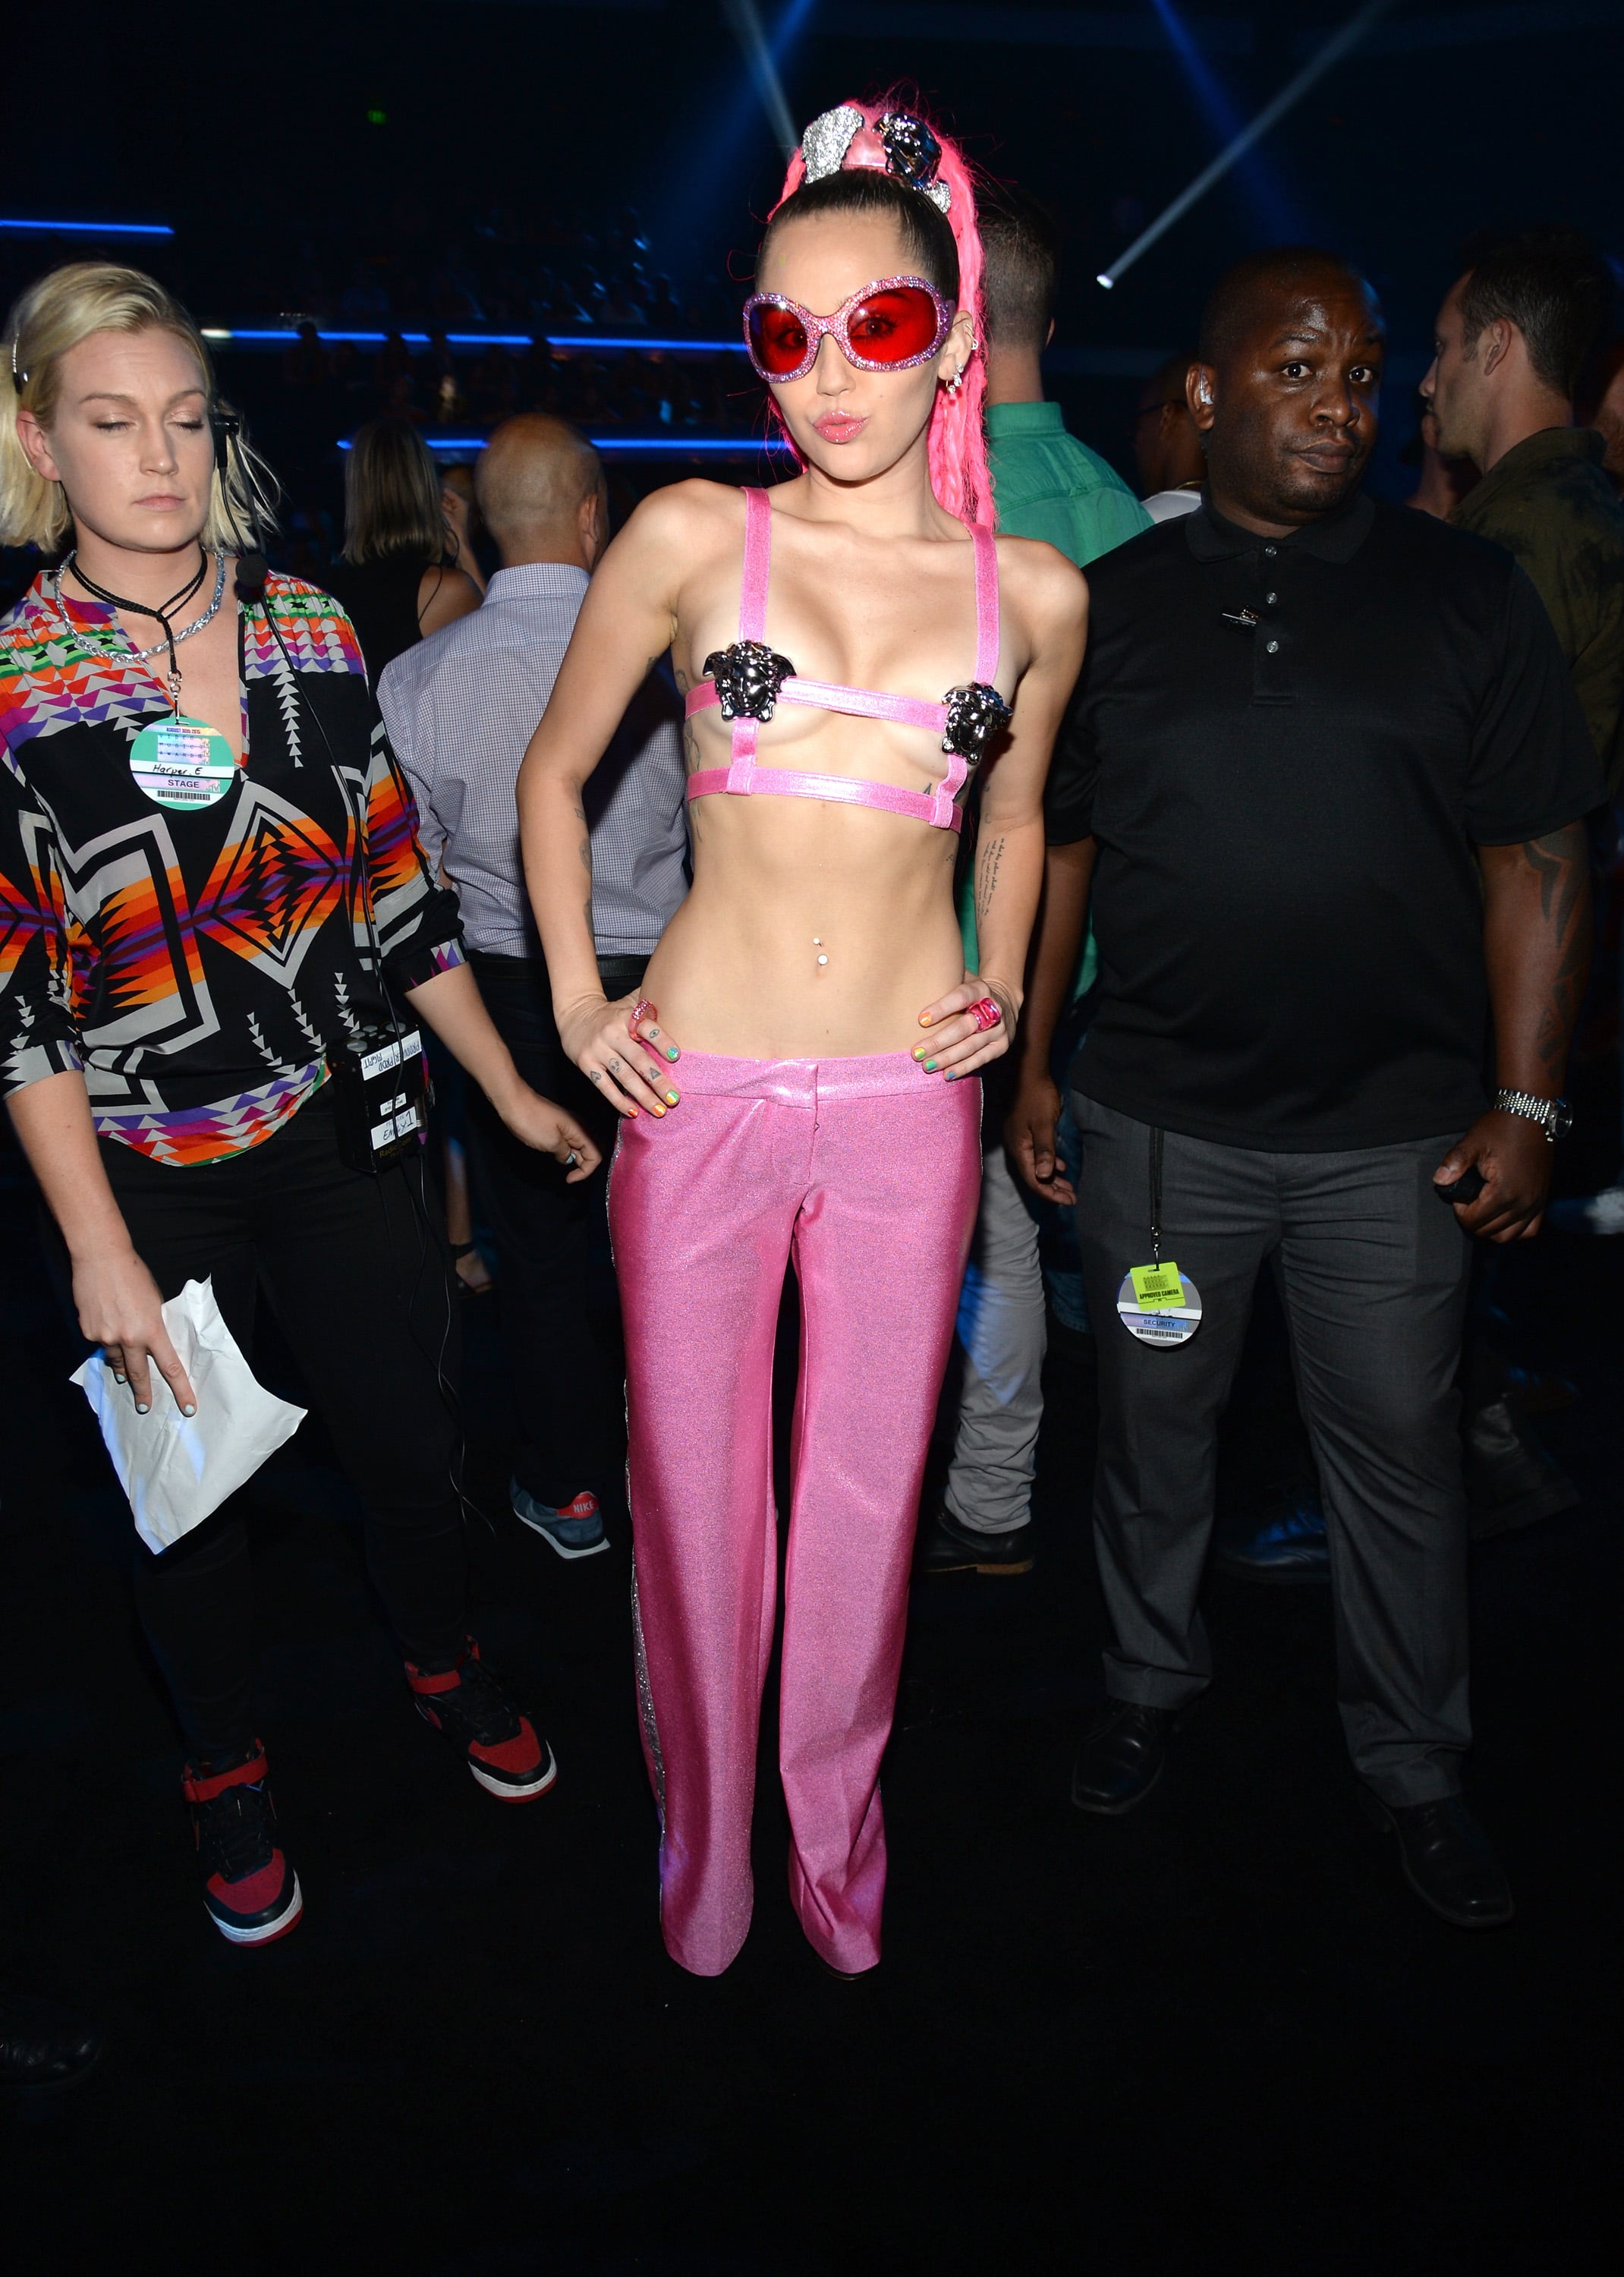 Miley's 5 Wild Outfits From 23